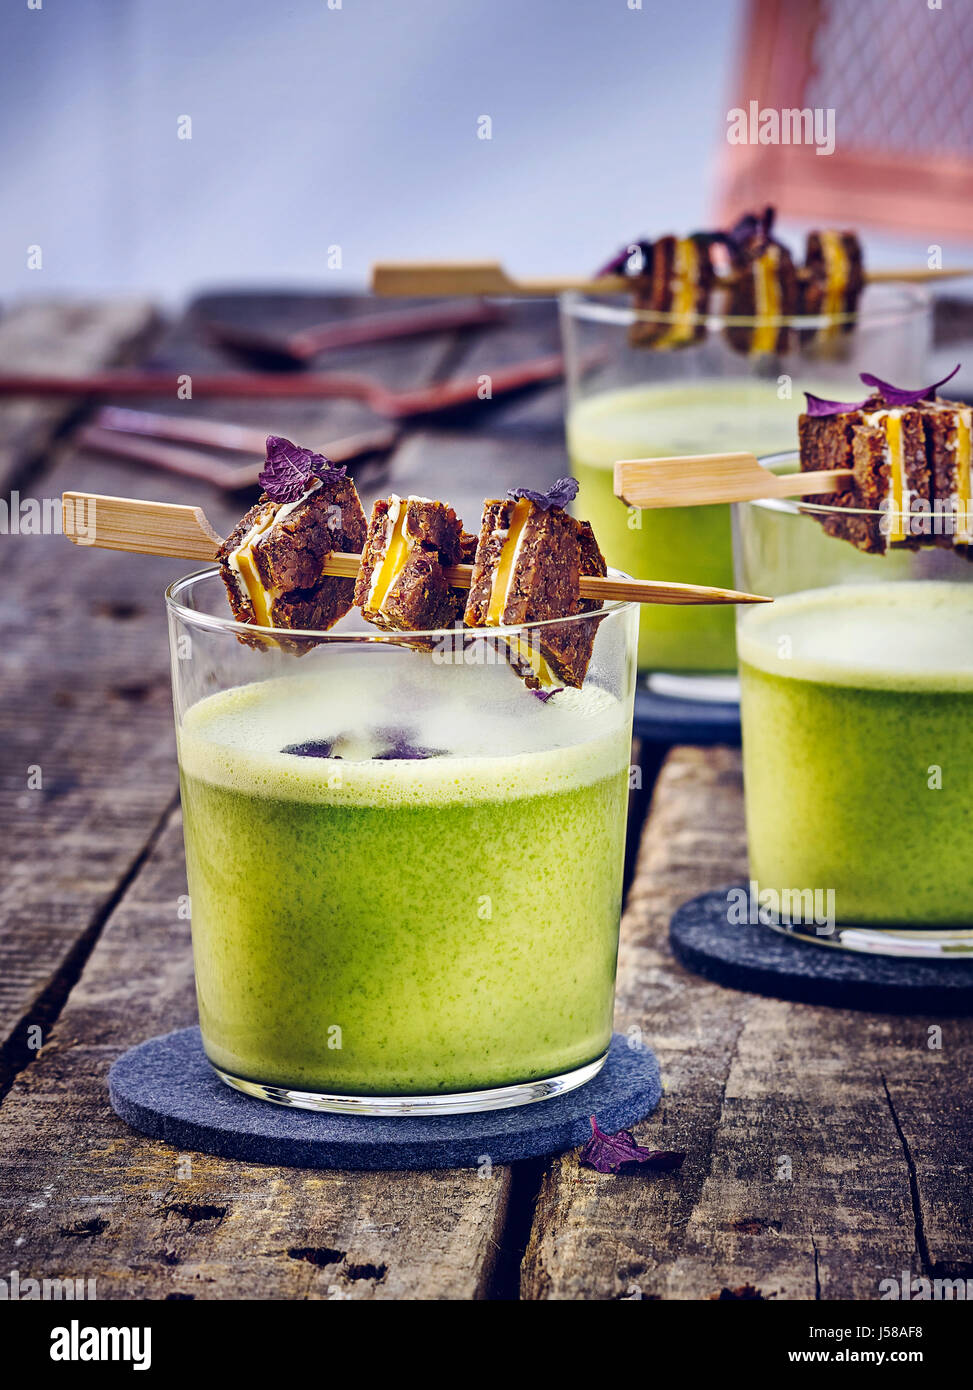 Kale soup with black bread and cheese skewers Stock Photo